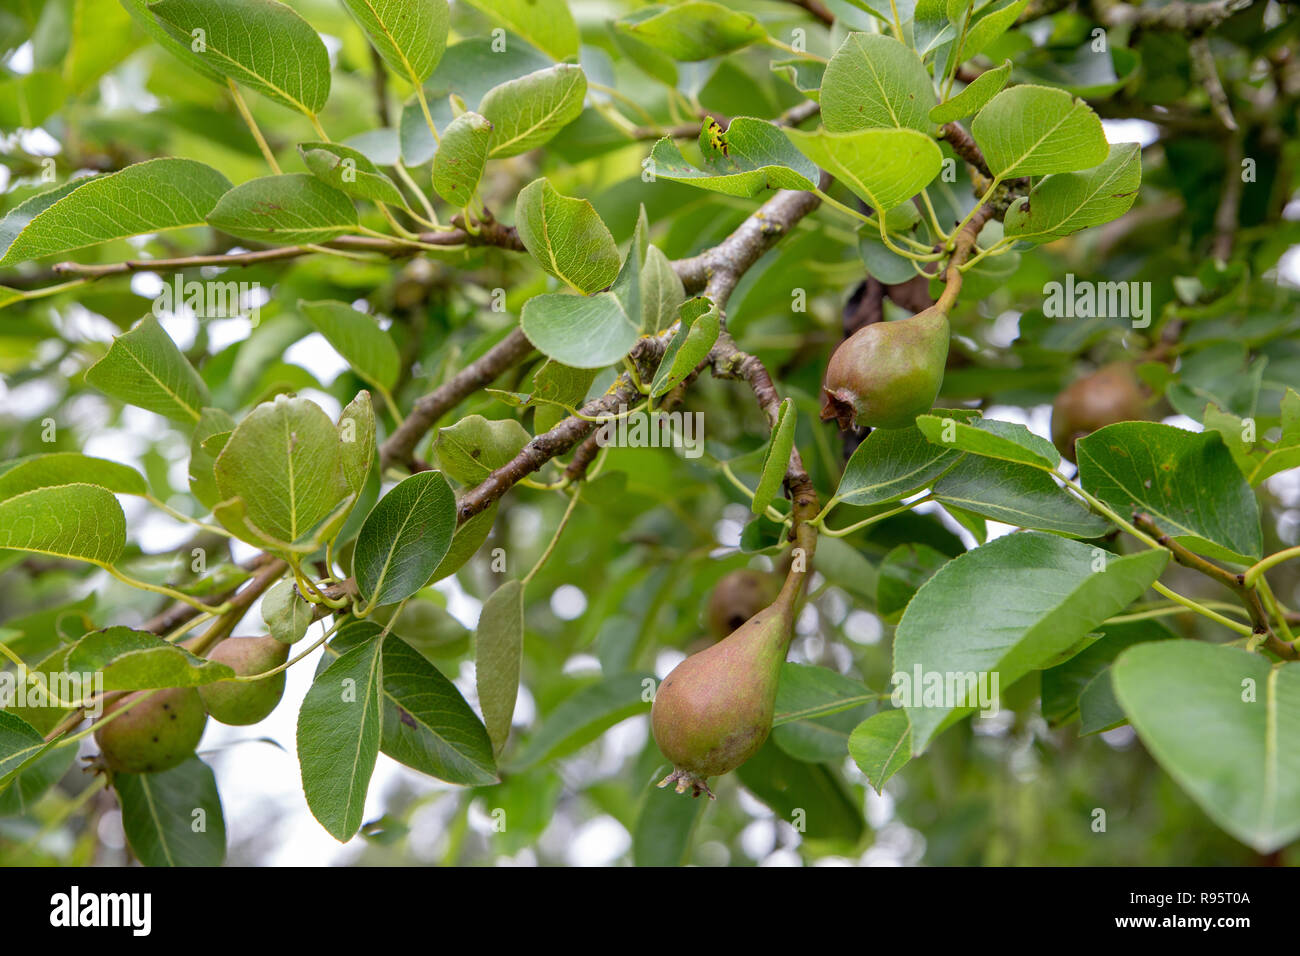 Young unripe pears growing on a pear tree in an organic garden in New Zealand Stock Photo